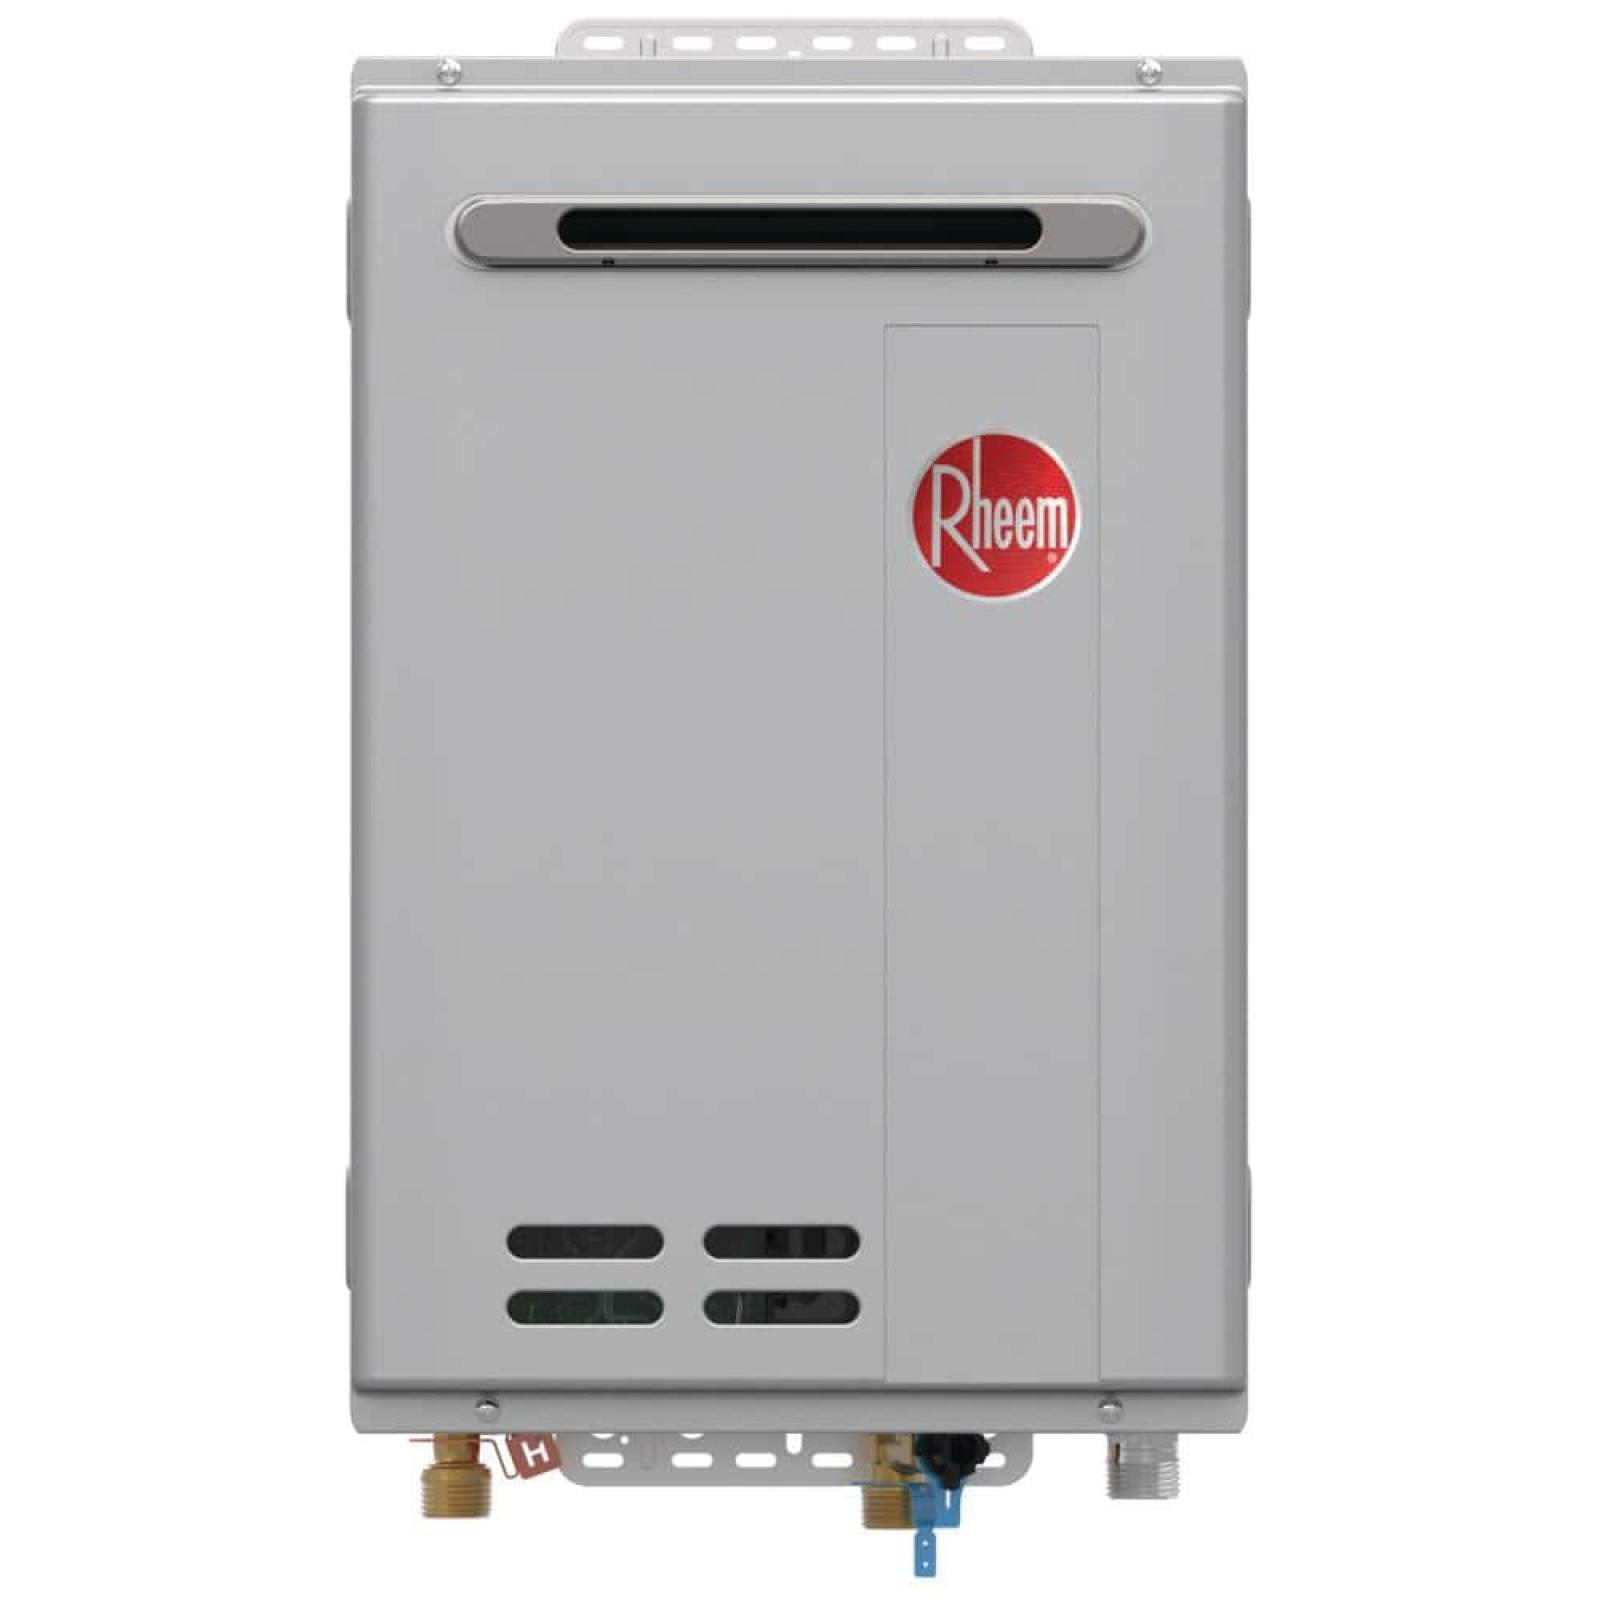 NEW! -Rheem Performance Plus 9.5 GPM Natural Gas Outdoor Smart Tankless Water Heater